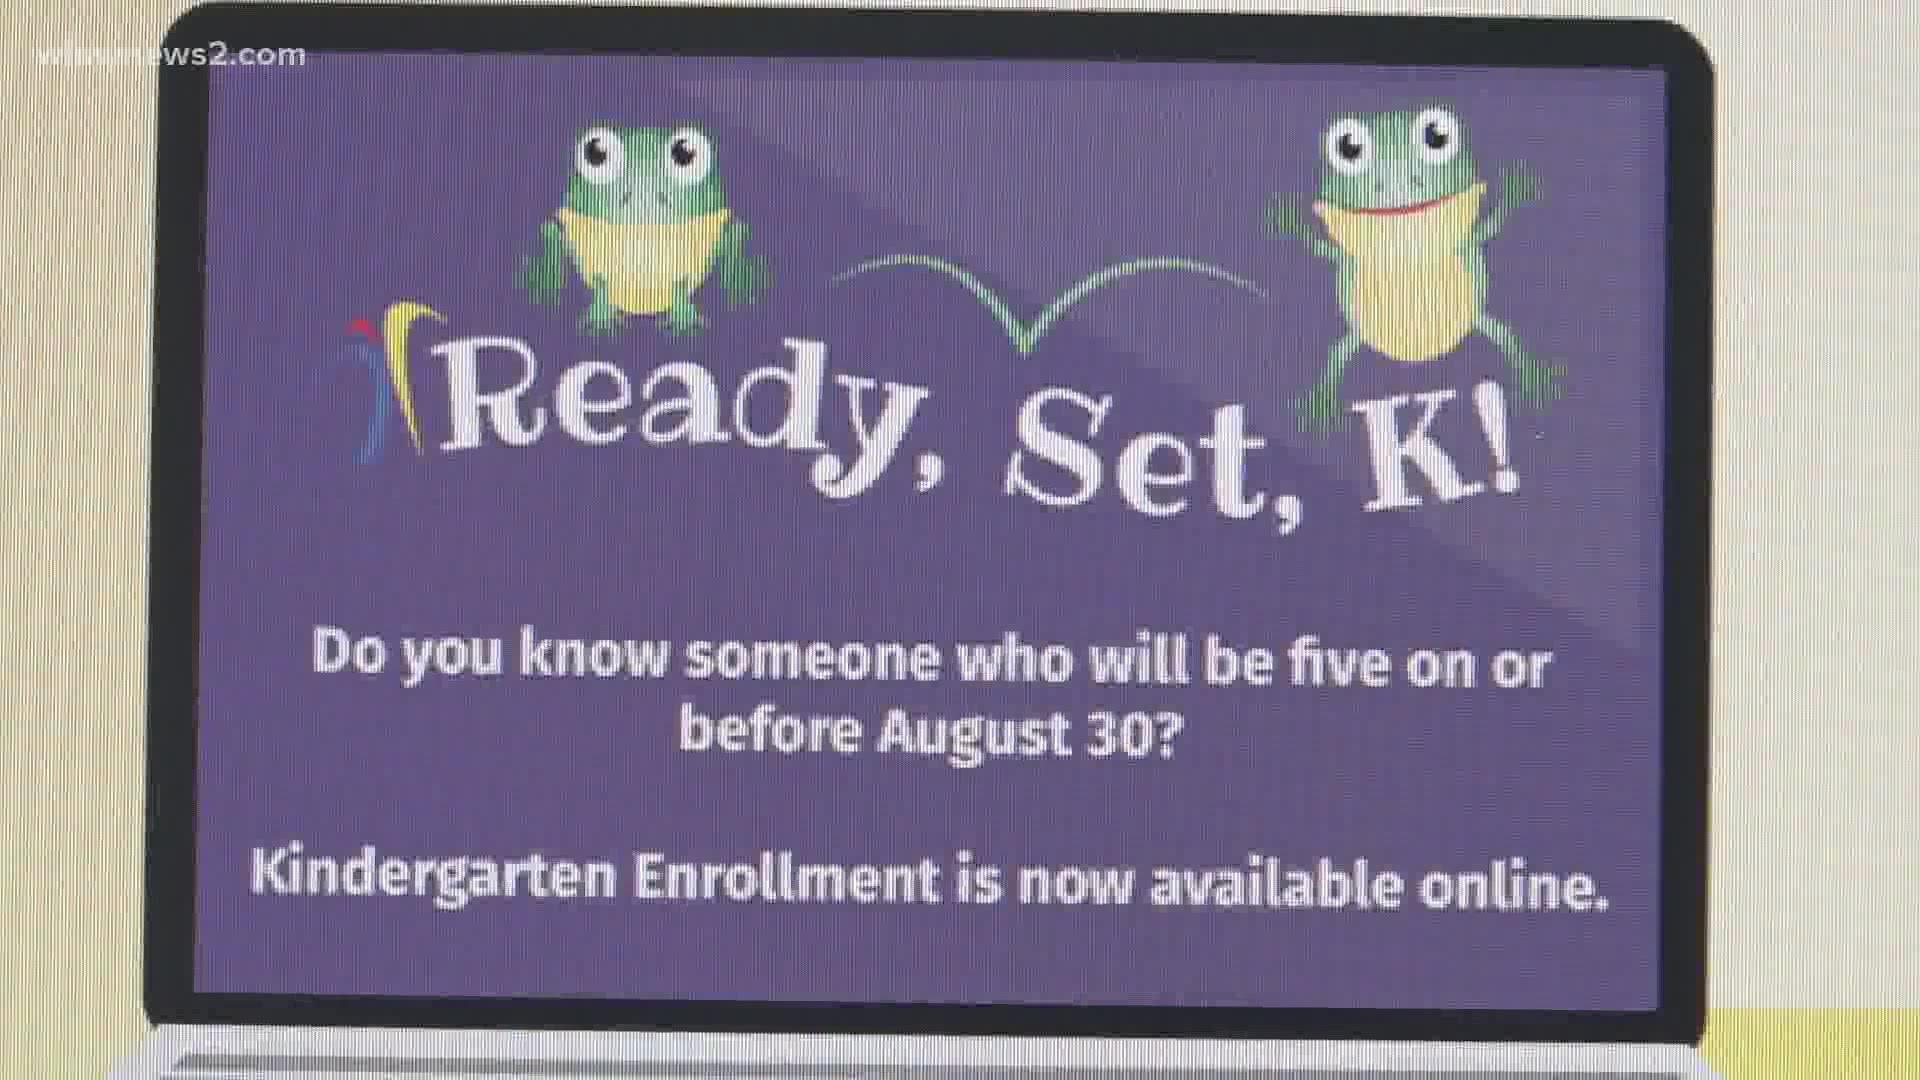 The WSFCS district says fewer kids are enrolled this year and time is running out.